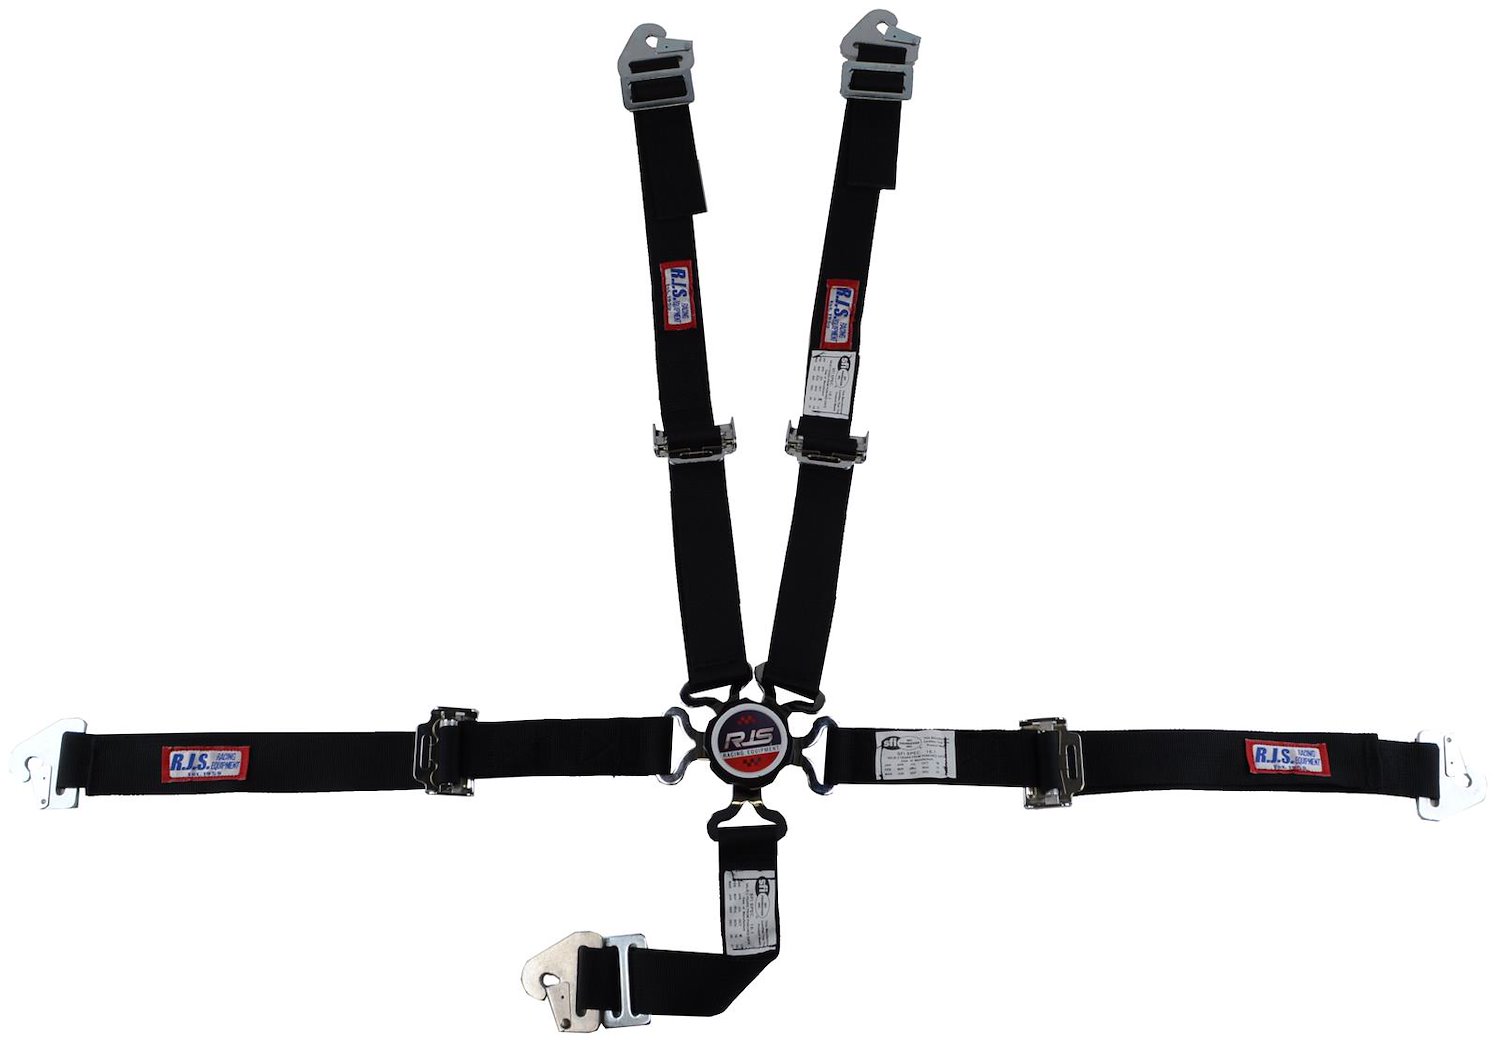 SFI 16.1 CAM-LOCK HARNESS 2 PULL DOWN Lap Belt 2 Shoulder Harness Individual FLOOR Mount 2 SINGLE Sub ALL WRAP/BOLT ENDS GRAY